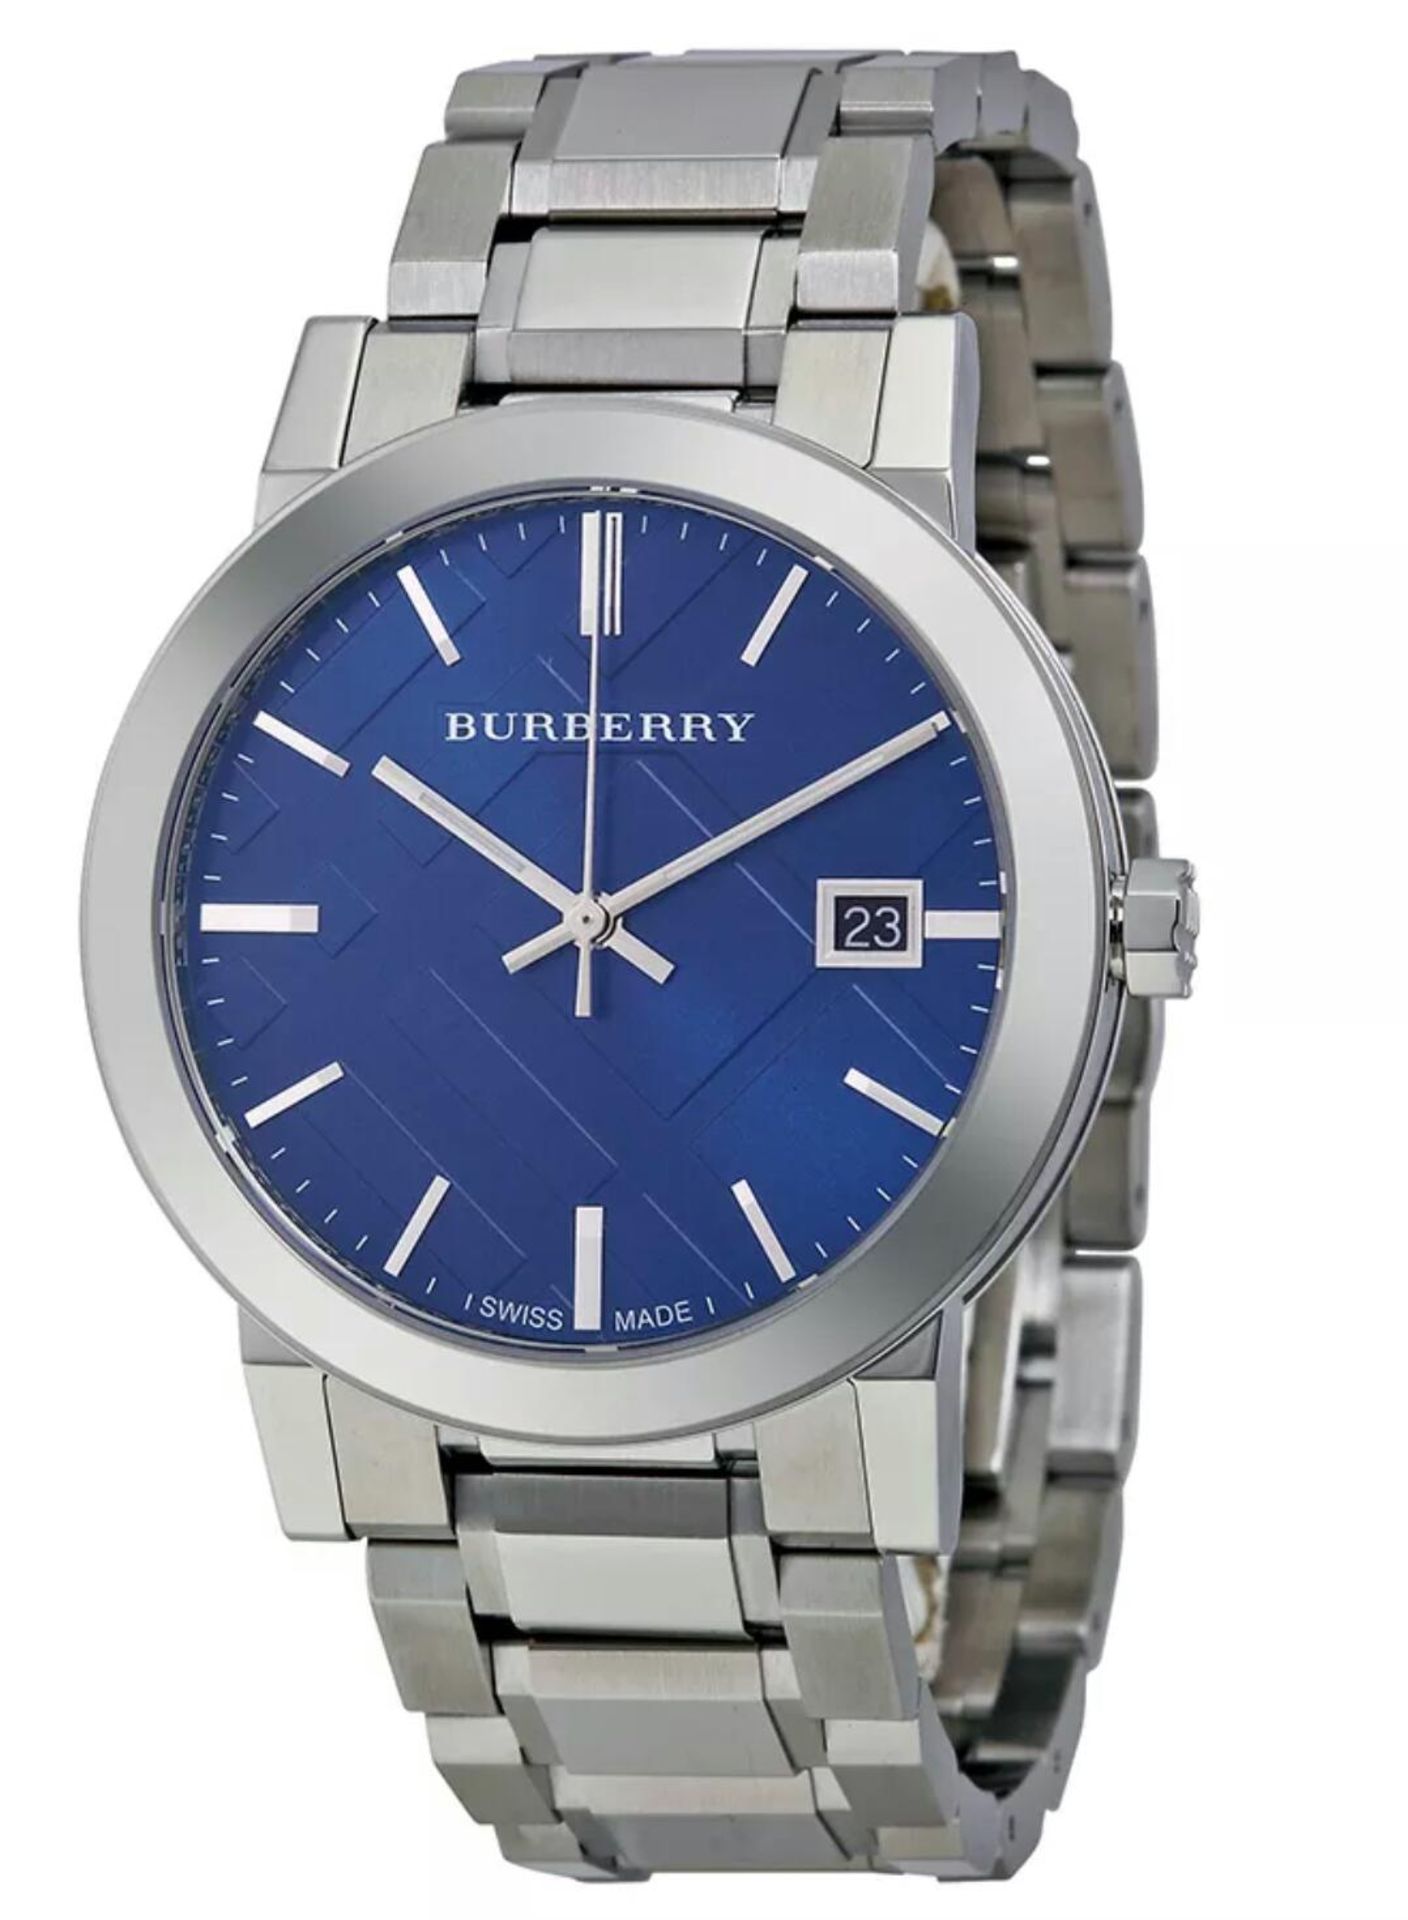 BRAND NEW BURBERRY BU9031, GENTS LARGE CHECK STAMPED , BLUE FACE DESIGNER WATCH - RRP £499, FREE P&P